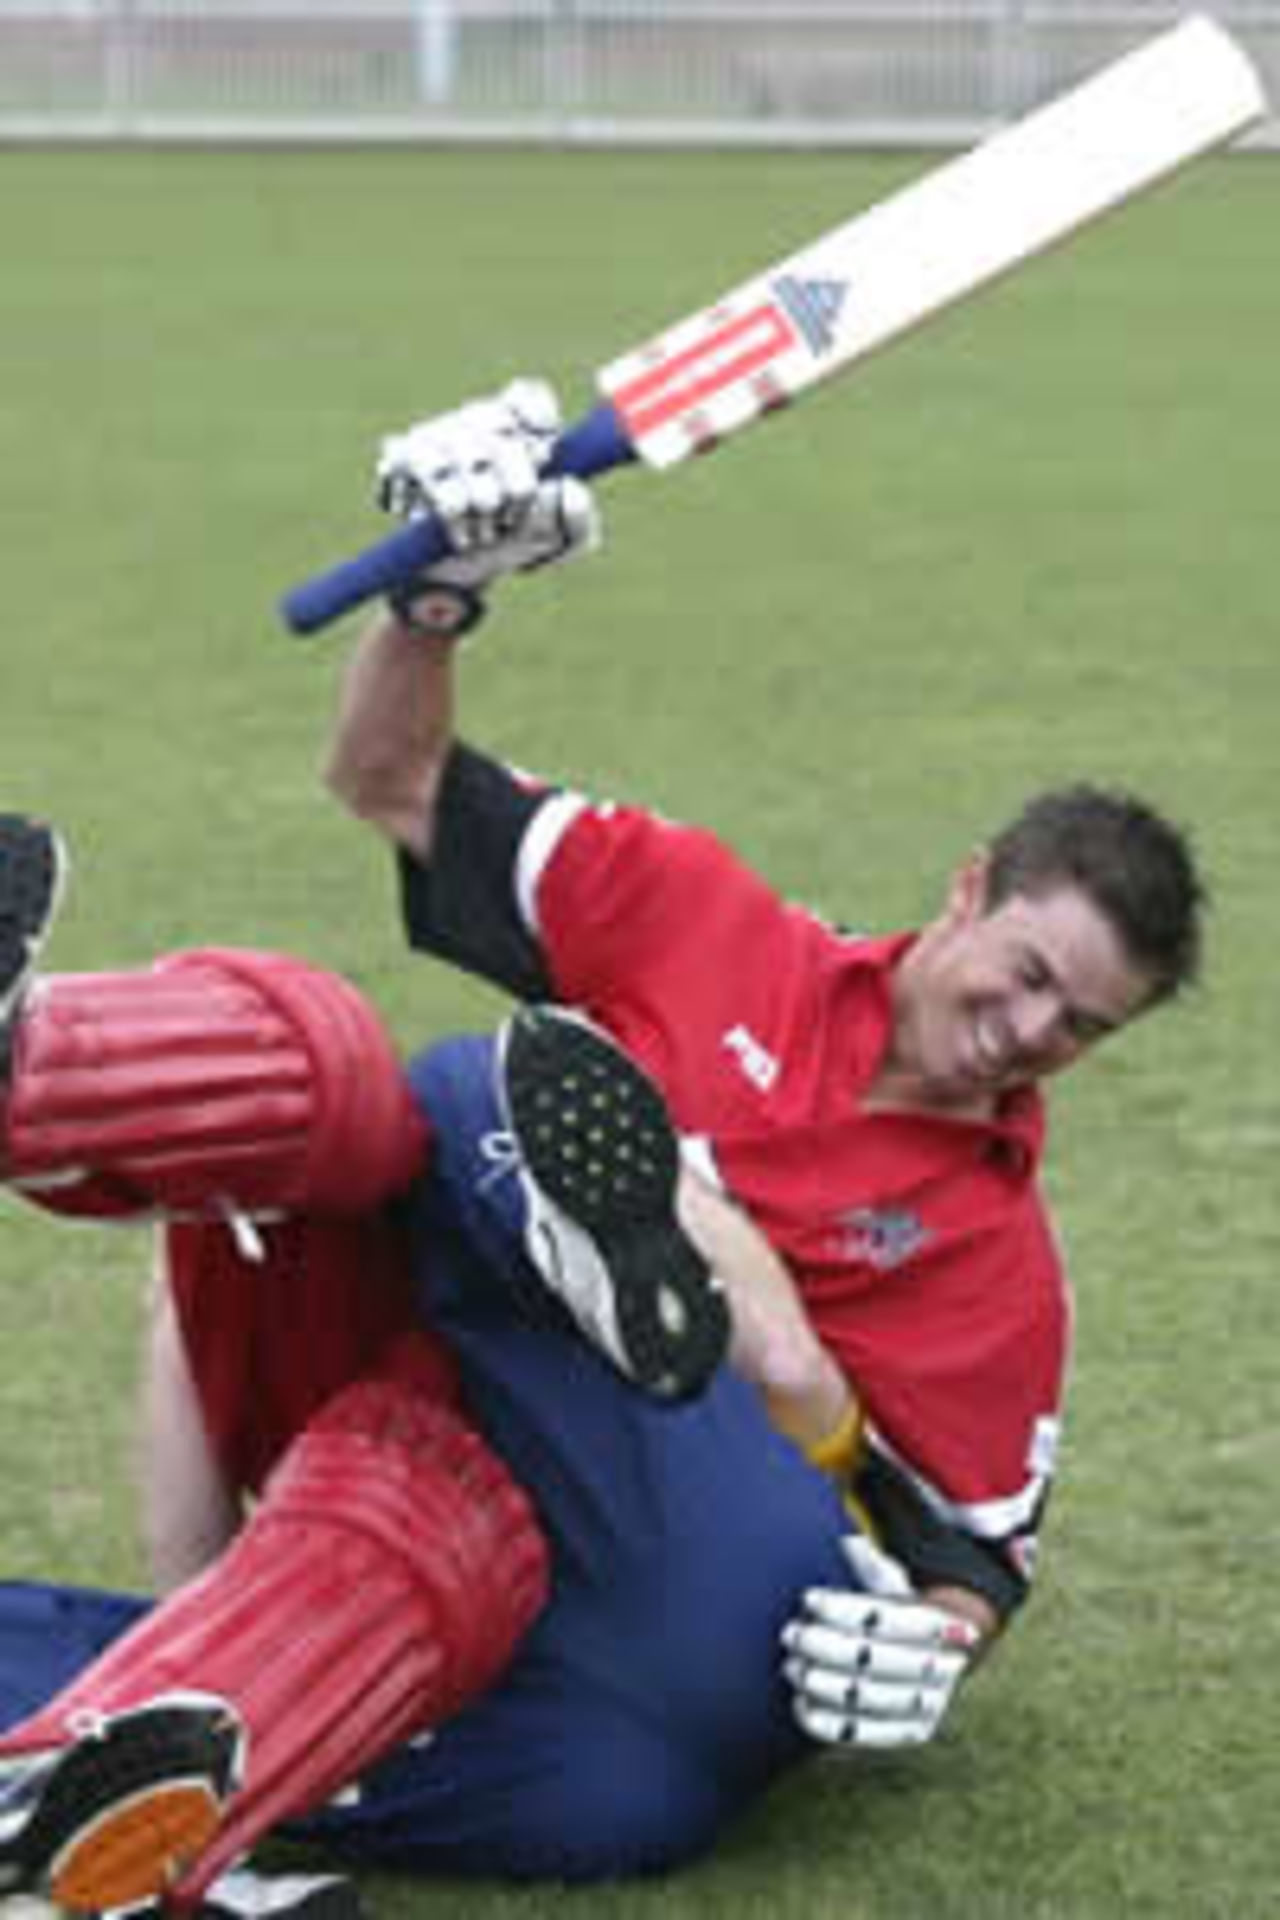 SYDNEY - OCTOBER 9: Greg Blewett of South Australia is tackled by Ian Harvey of Victoria during the launch of the 2002-2003 ING Cup, One Day Cricket Competition, at Drummoyne Oval in Sydney, Australia, October 9, 2002.